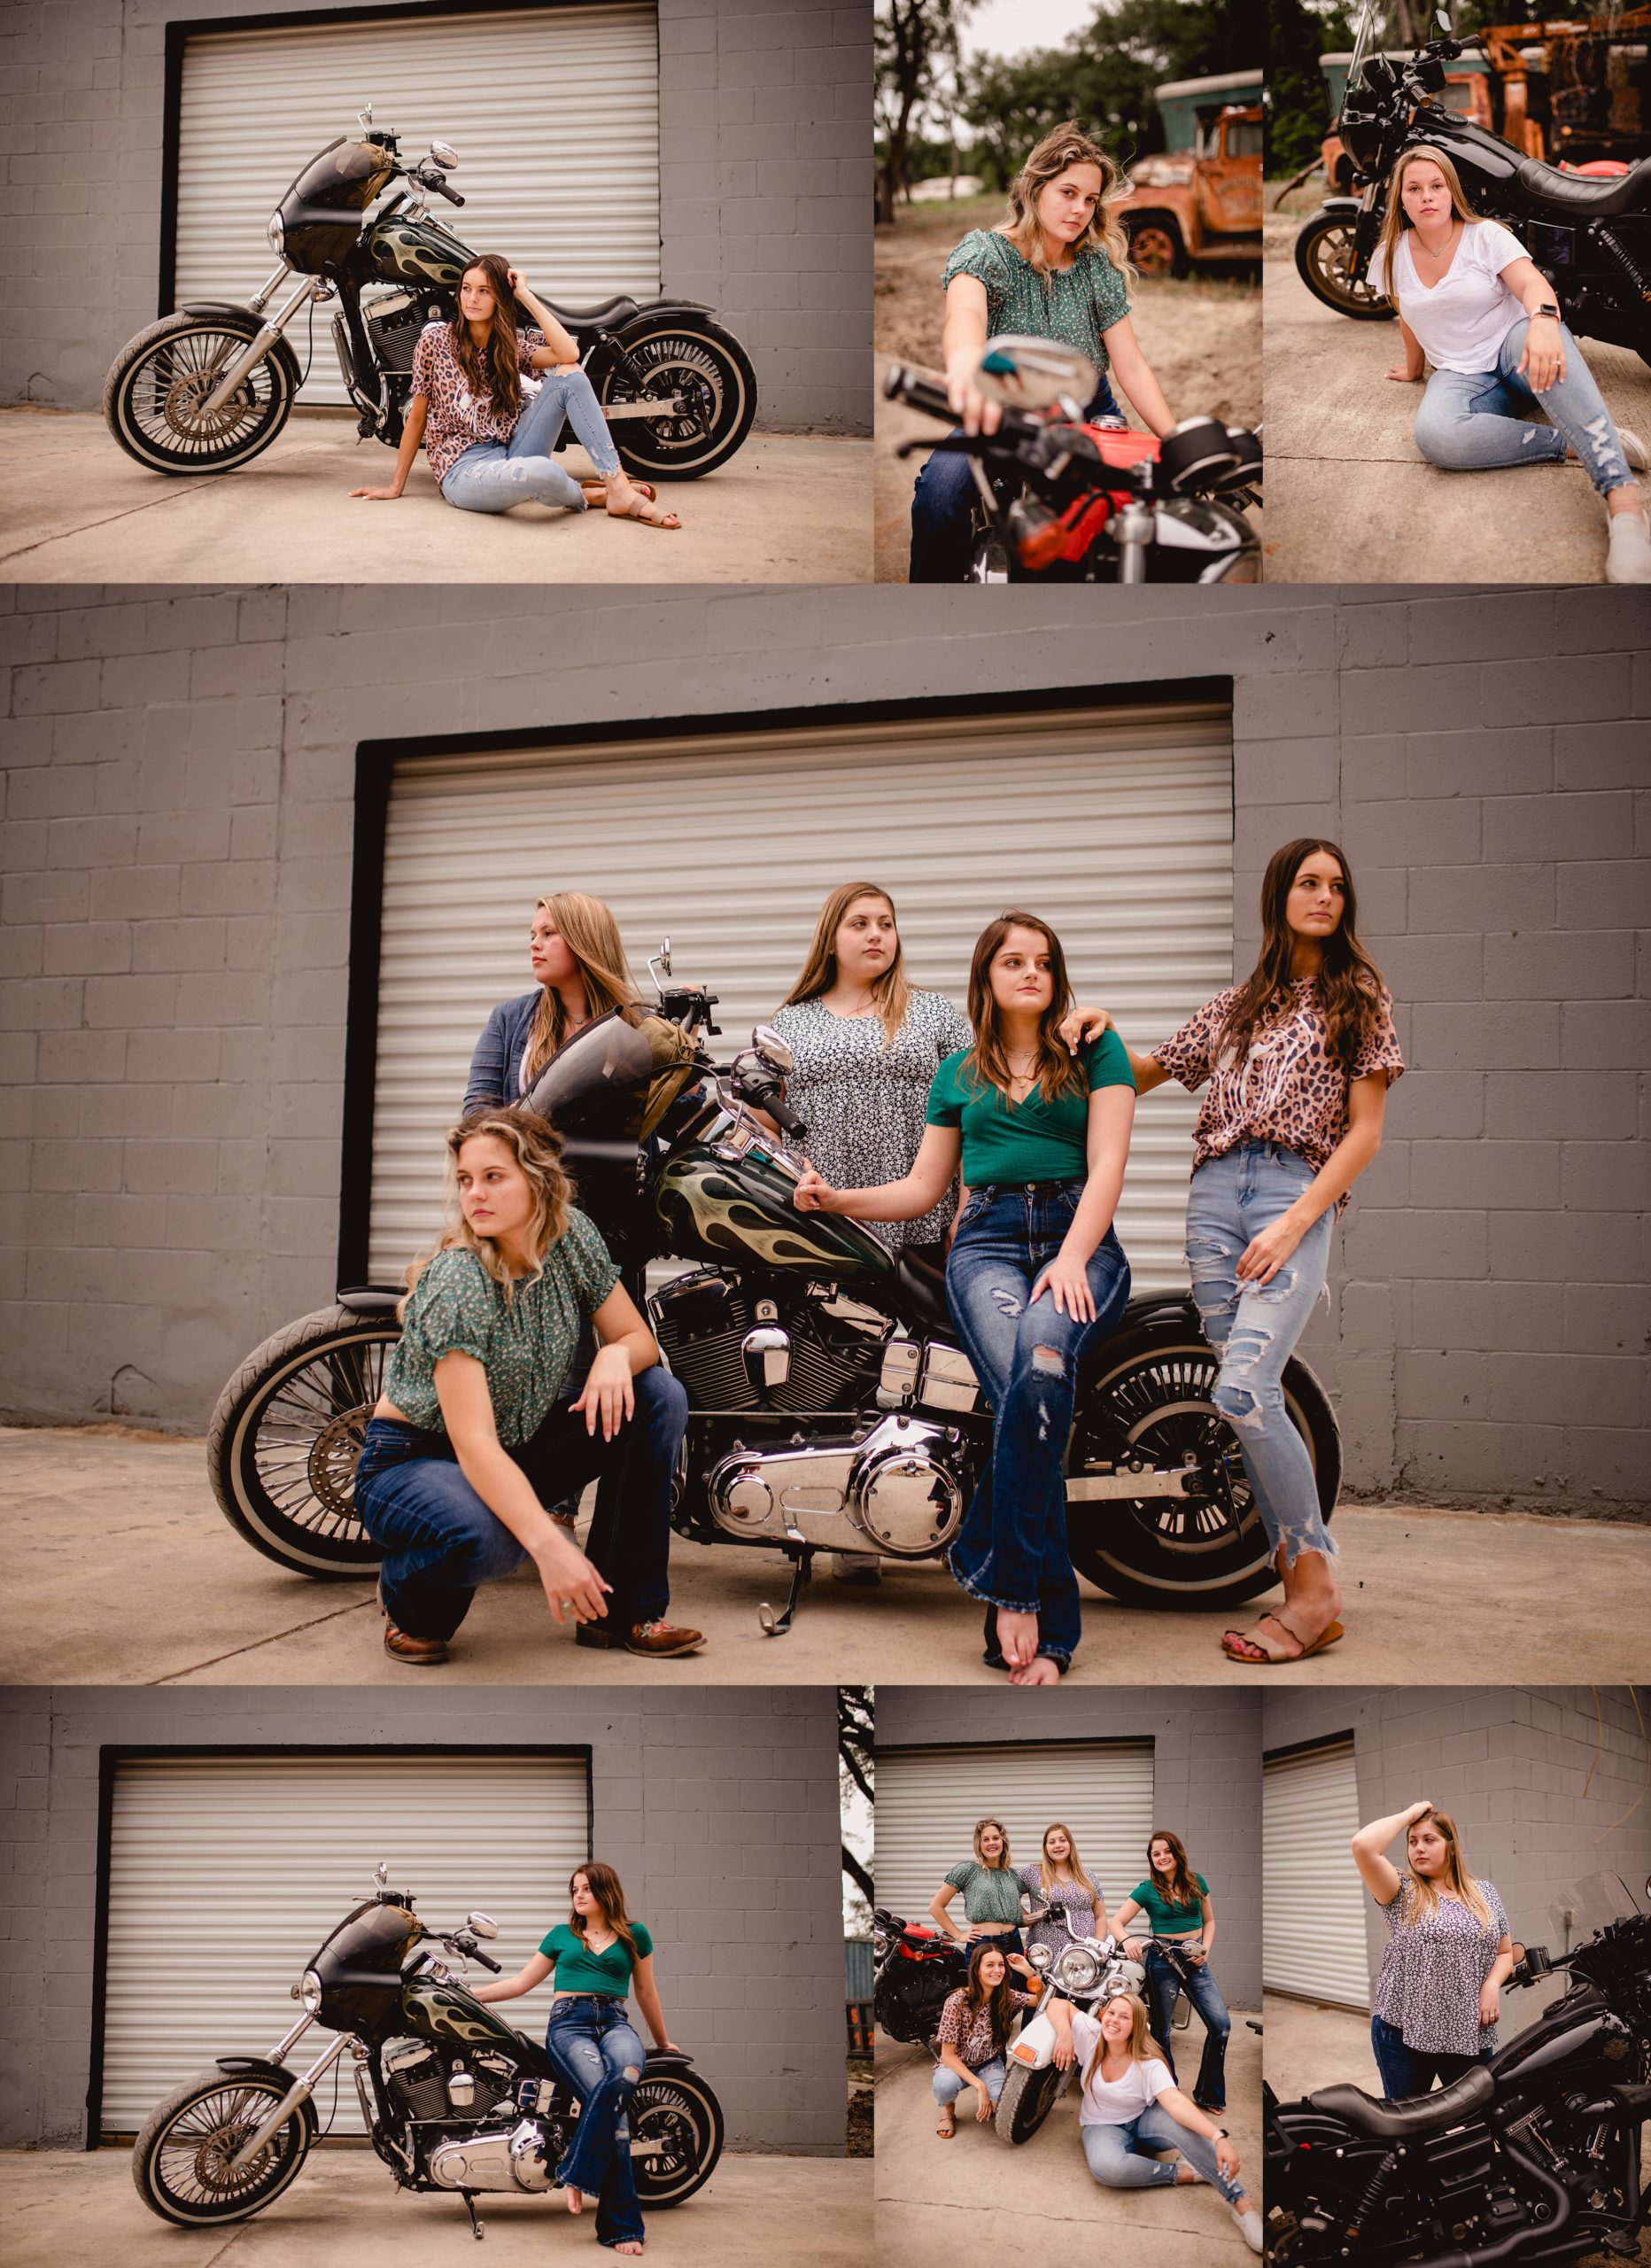 Luxury senior experience in North Florida. Senior Model Team with motorcycles.